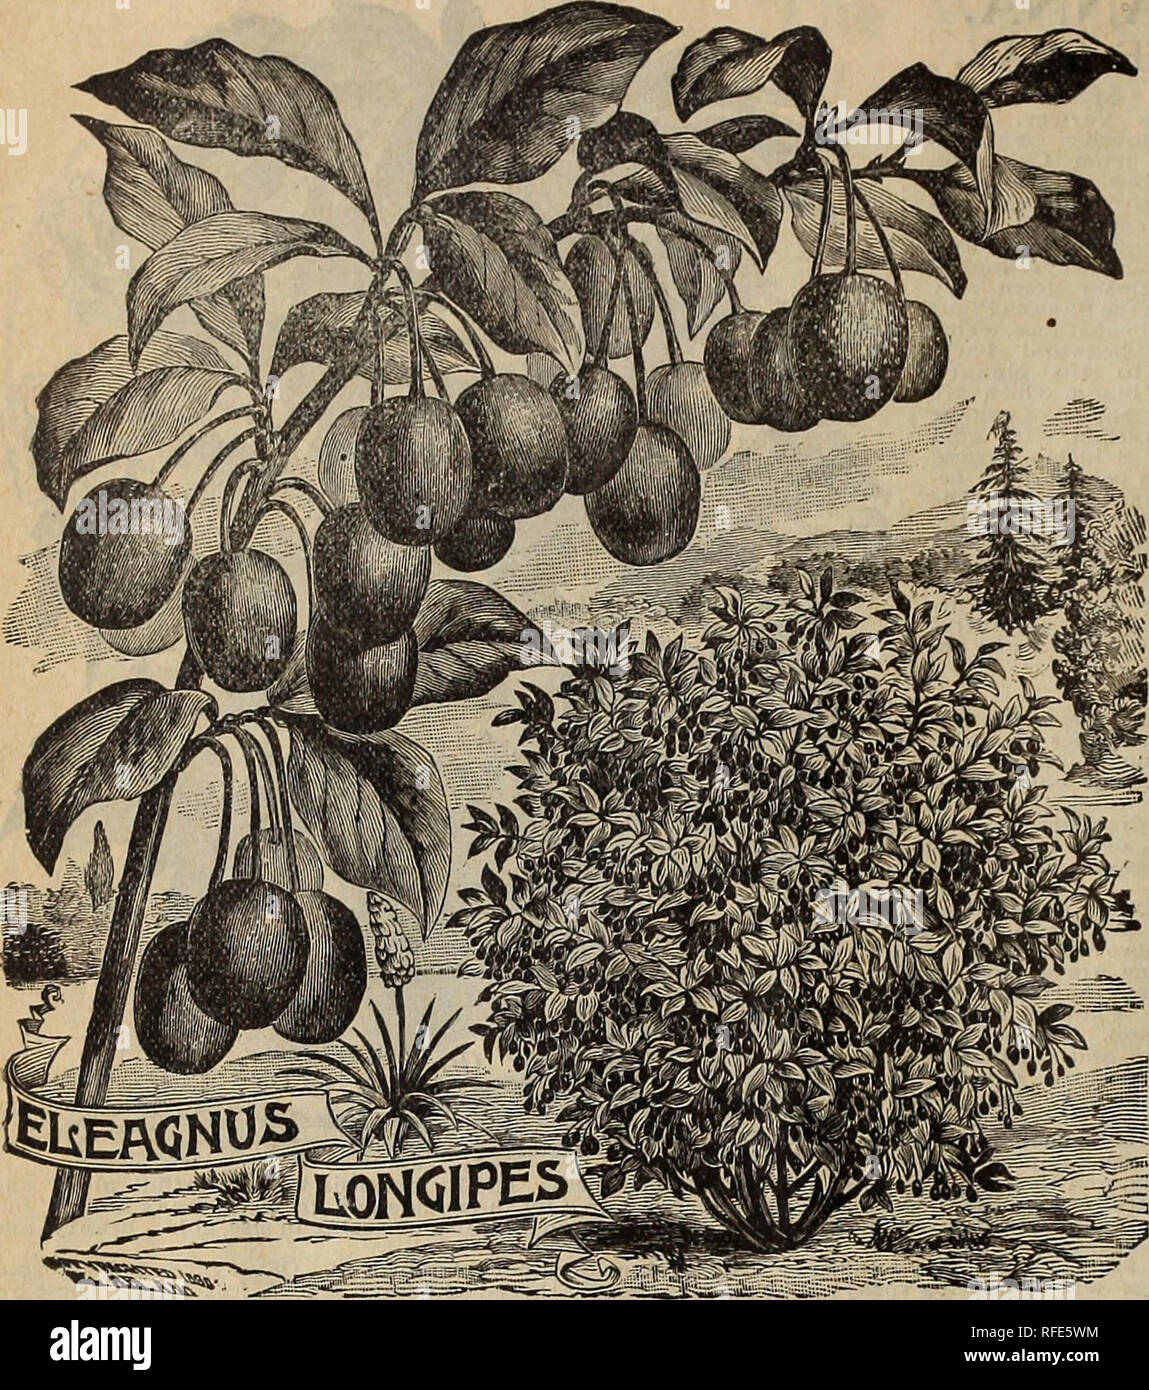 . May's catalogue of northern grown seeds, plants, bulbs &amp; fruits. Nursery stock Minnesota Saint Paul Catalogs; Nurseries (Horticulture) Minnesota Saint Paul Catalogs; Vegetables Seeds Catalogs; Flowers Seeds Catalogs; Plants, Ornamental Catalogs; Fruit Catalogs. 12 MAY'S CATALOGUE OF NORTHERN CROWN SEEDS, BULBS, PLANTS AND FRUITS.. The Hardy Russian Olive. Eleagnus Longipes. (See Cut.) This rare and valuable shrub was introduced several years since from Japan, and like other plants from the land of the Mikado is perfectly hardy, exceedingly ornamental on the lawn as well as valuable for t Stock Photo